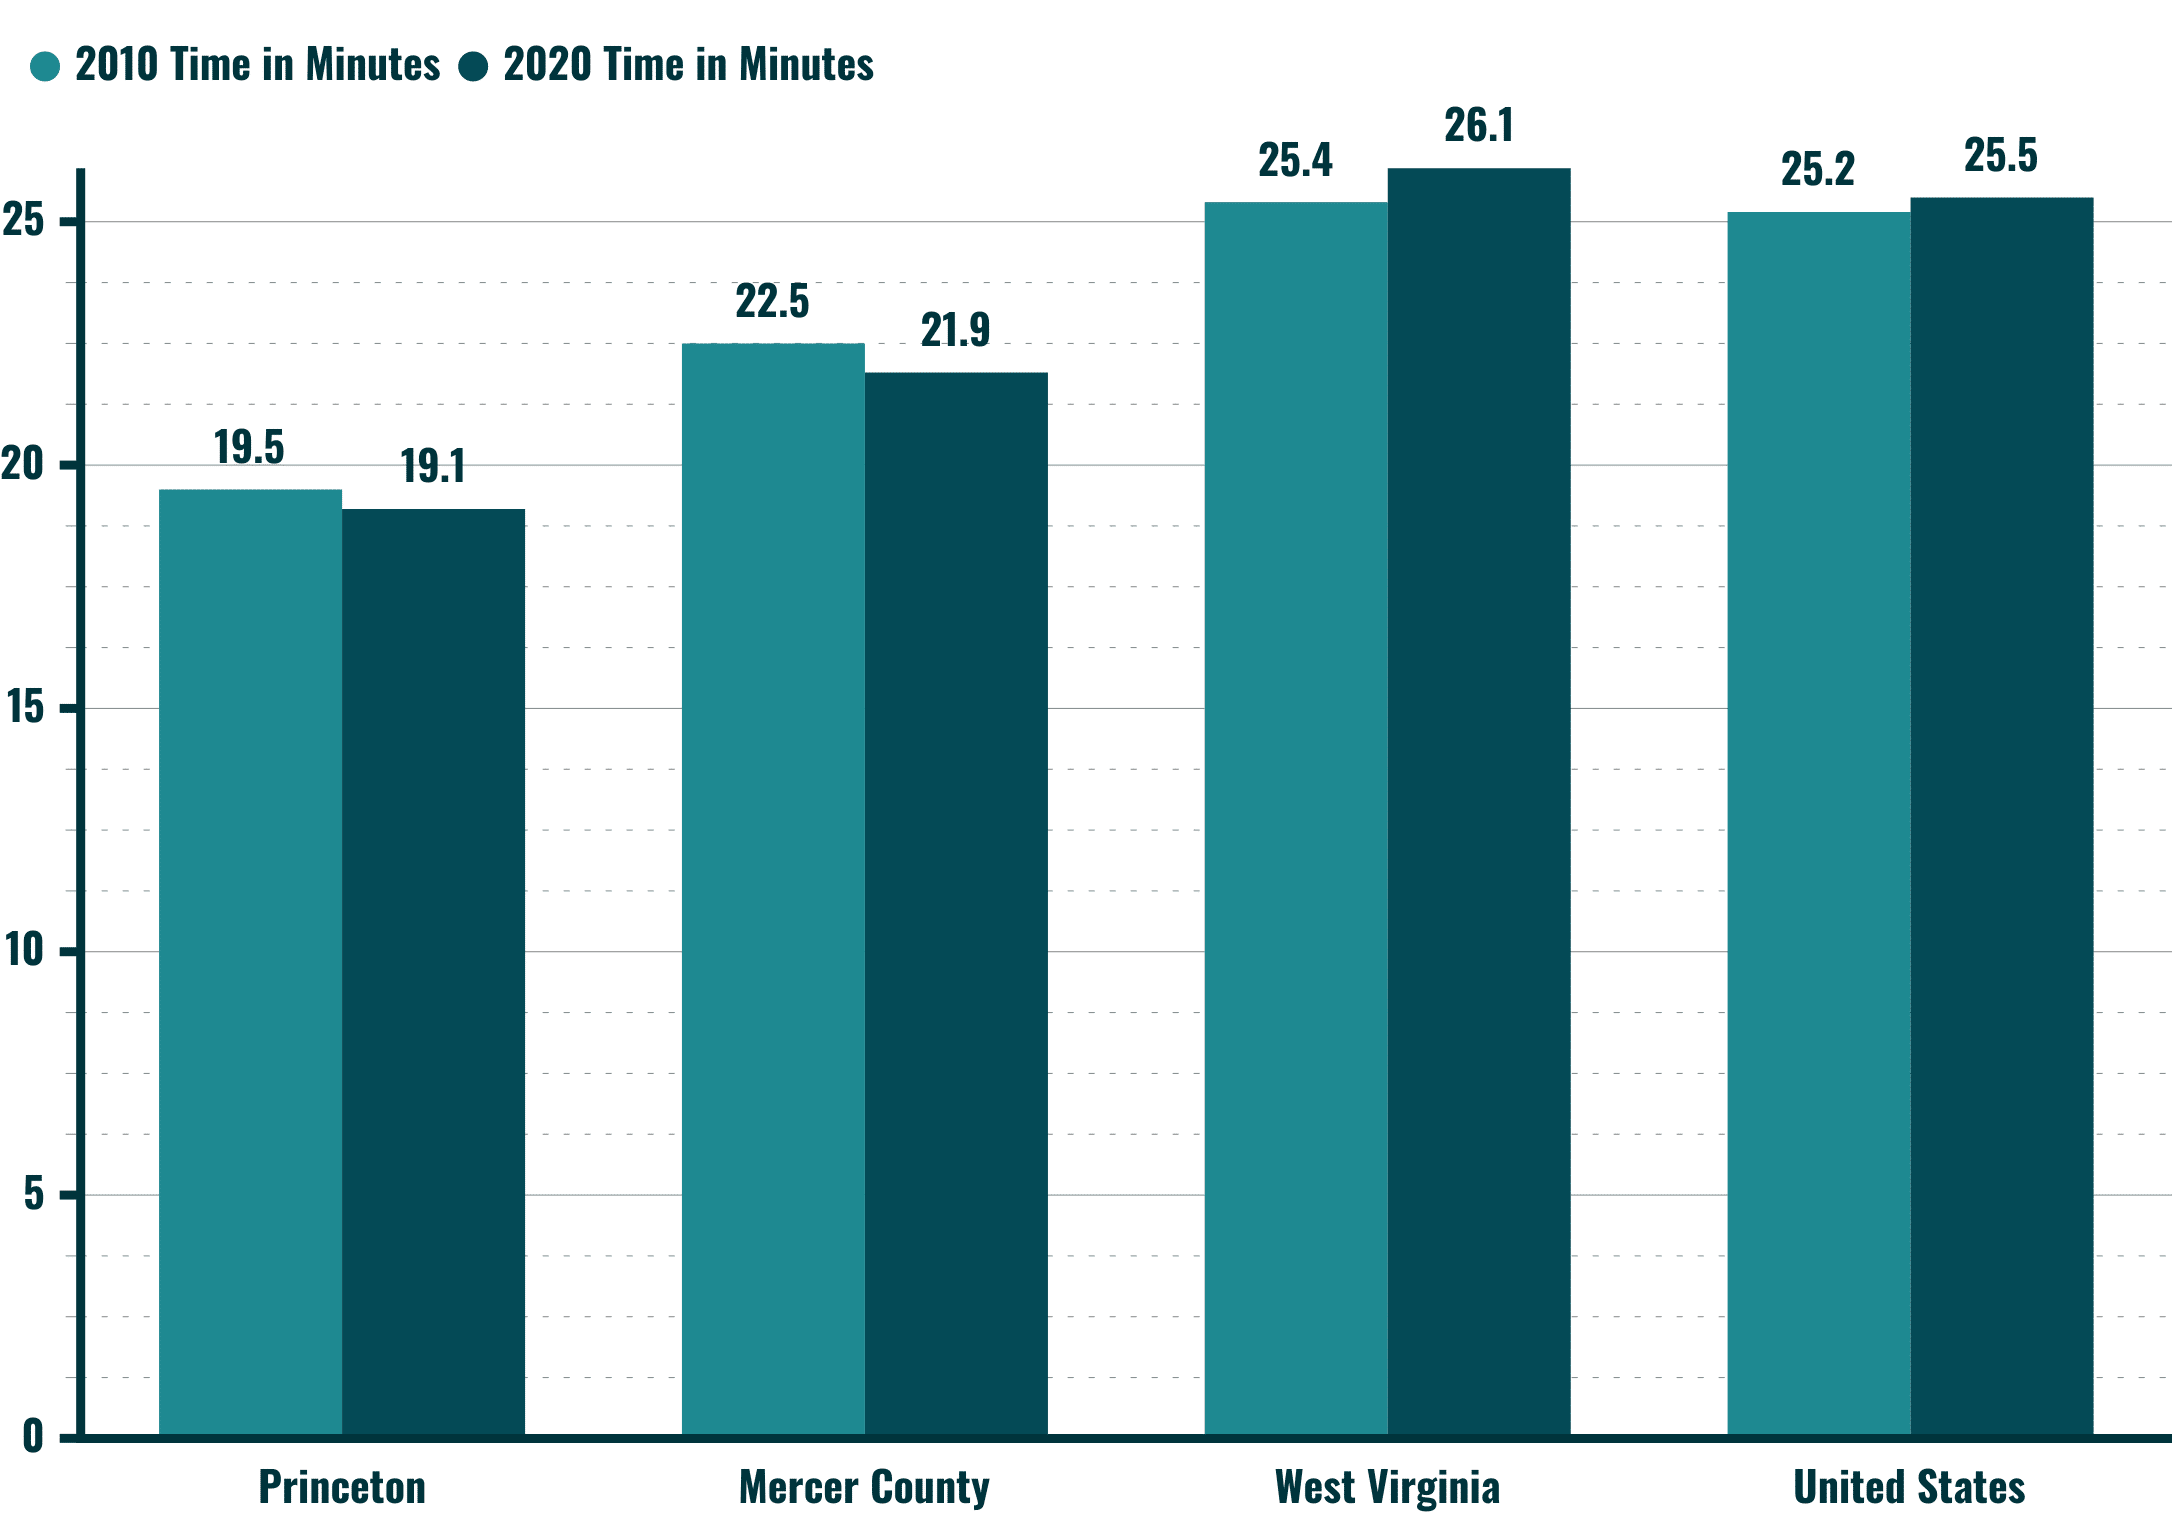 This is a bar chart that compares Princeton, Mercer County, West Virginia, and United States commute times from 2010 and 2020 in minutes. Commute times in minutes, 2010: Princeton - 19.5, Mercer County - 22.5, West Virginia - 25.4, United States - 25.2. Commute times in minutes, 2020: Princeton - 19.1, Mercer County - 21.9, WV - 26.1, United States - 25.5.